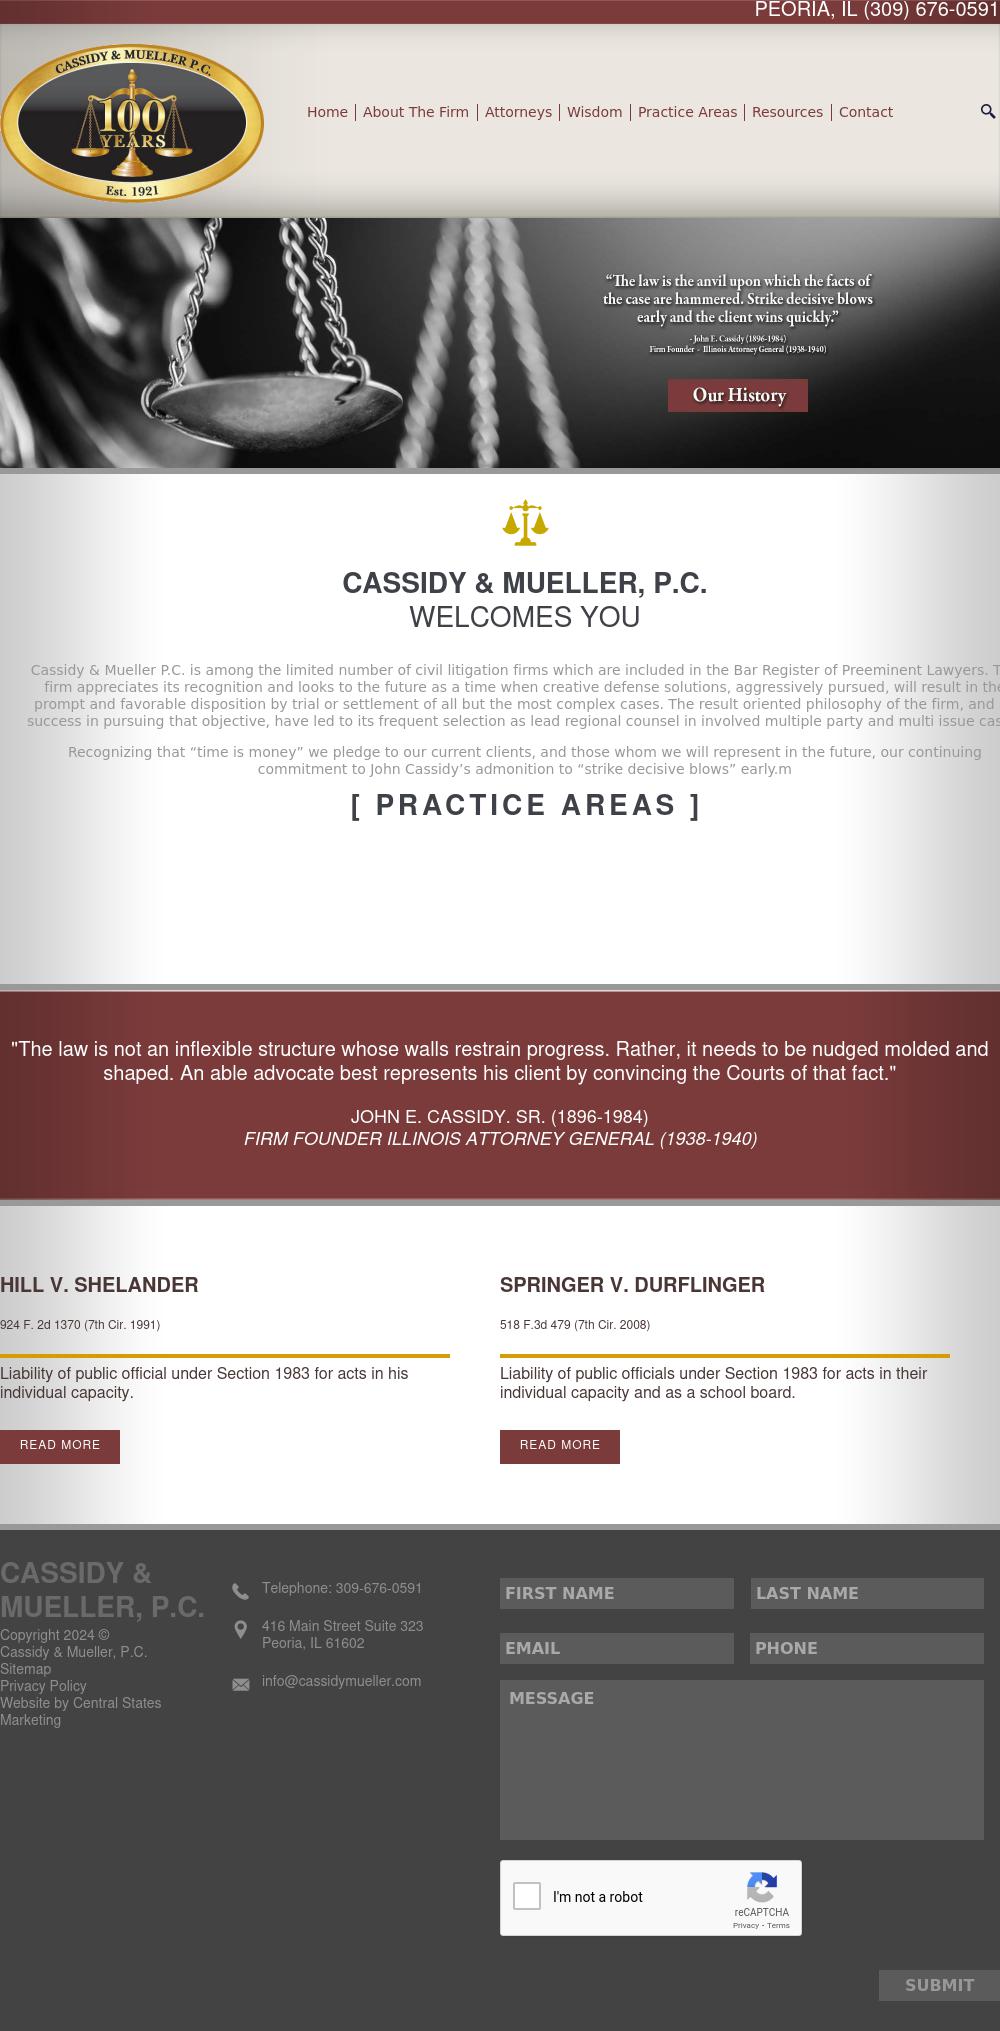 Cassidy & Mueller - Peoria IL Lawyers